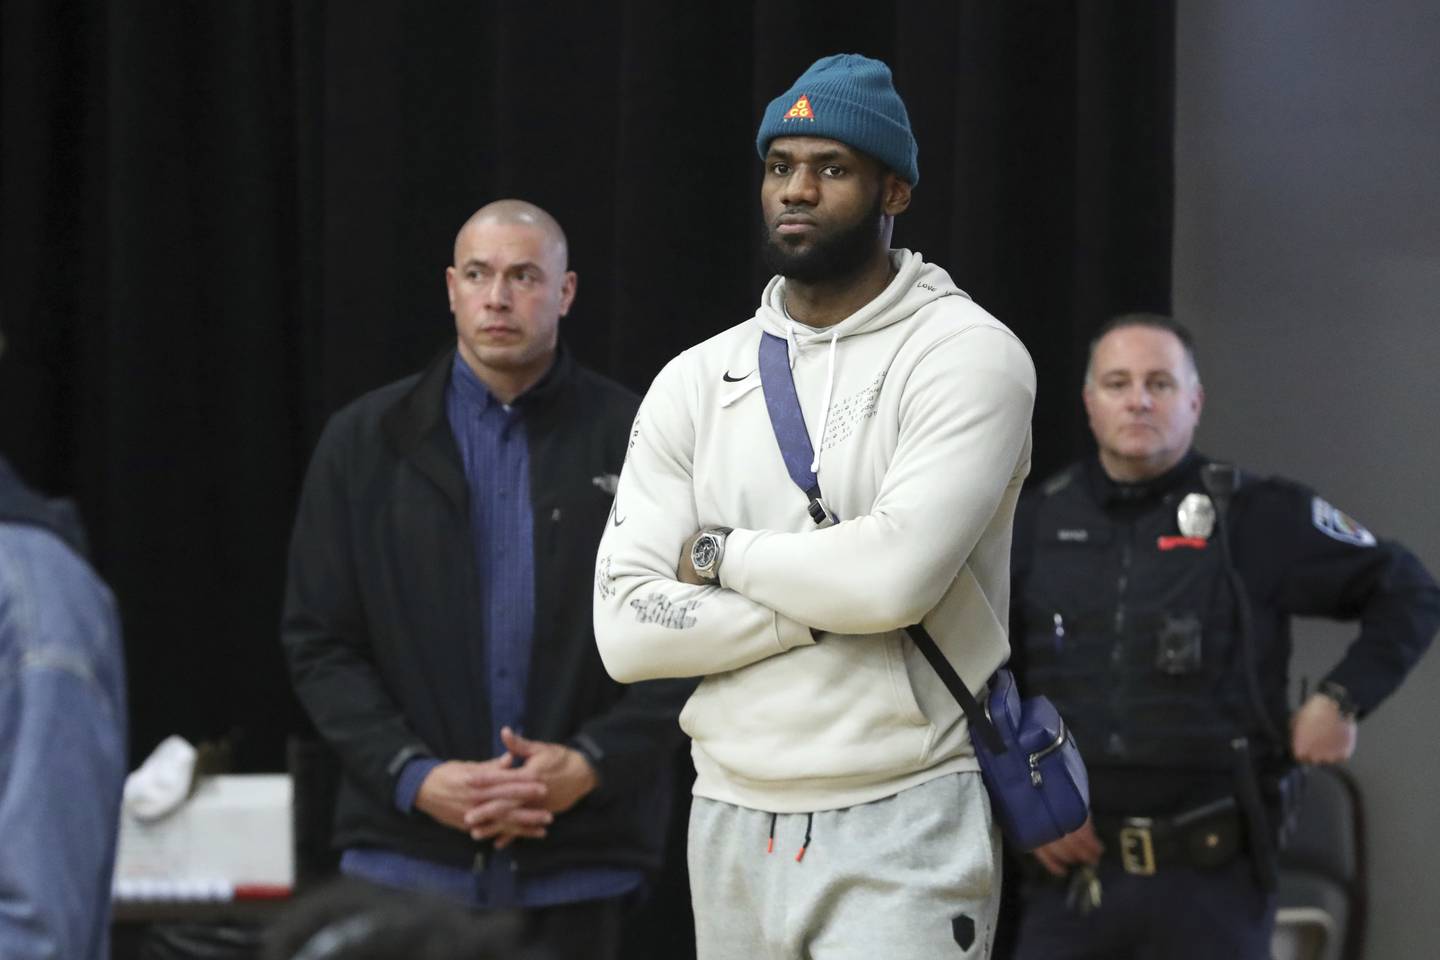 LA Lakers forward LeBron James waits for the end of the game to meet his son, Sierra Canyon's Bronny James, after their defeat at the hands of Paul VI in a high school basketball game at the Hoophall Classic, Monday, January 20, 2020, in Springfield, MA. 